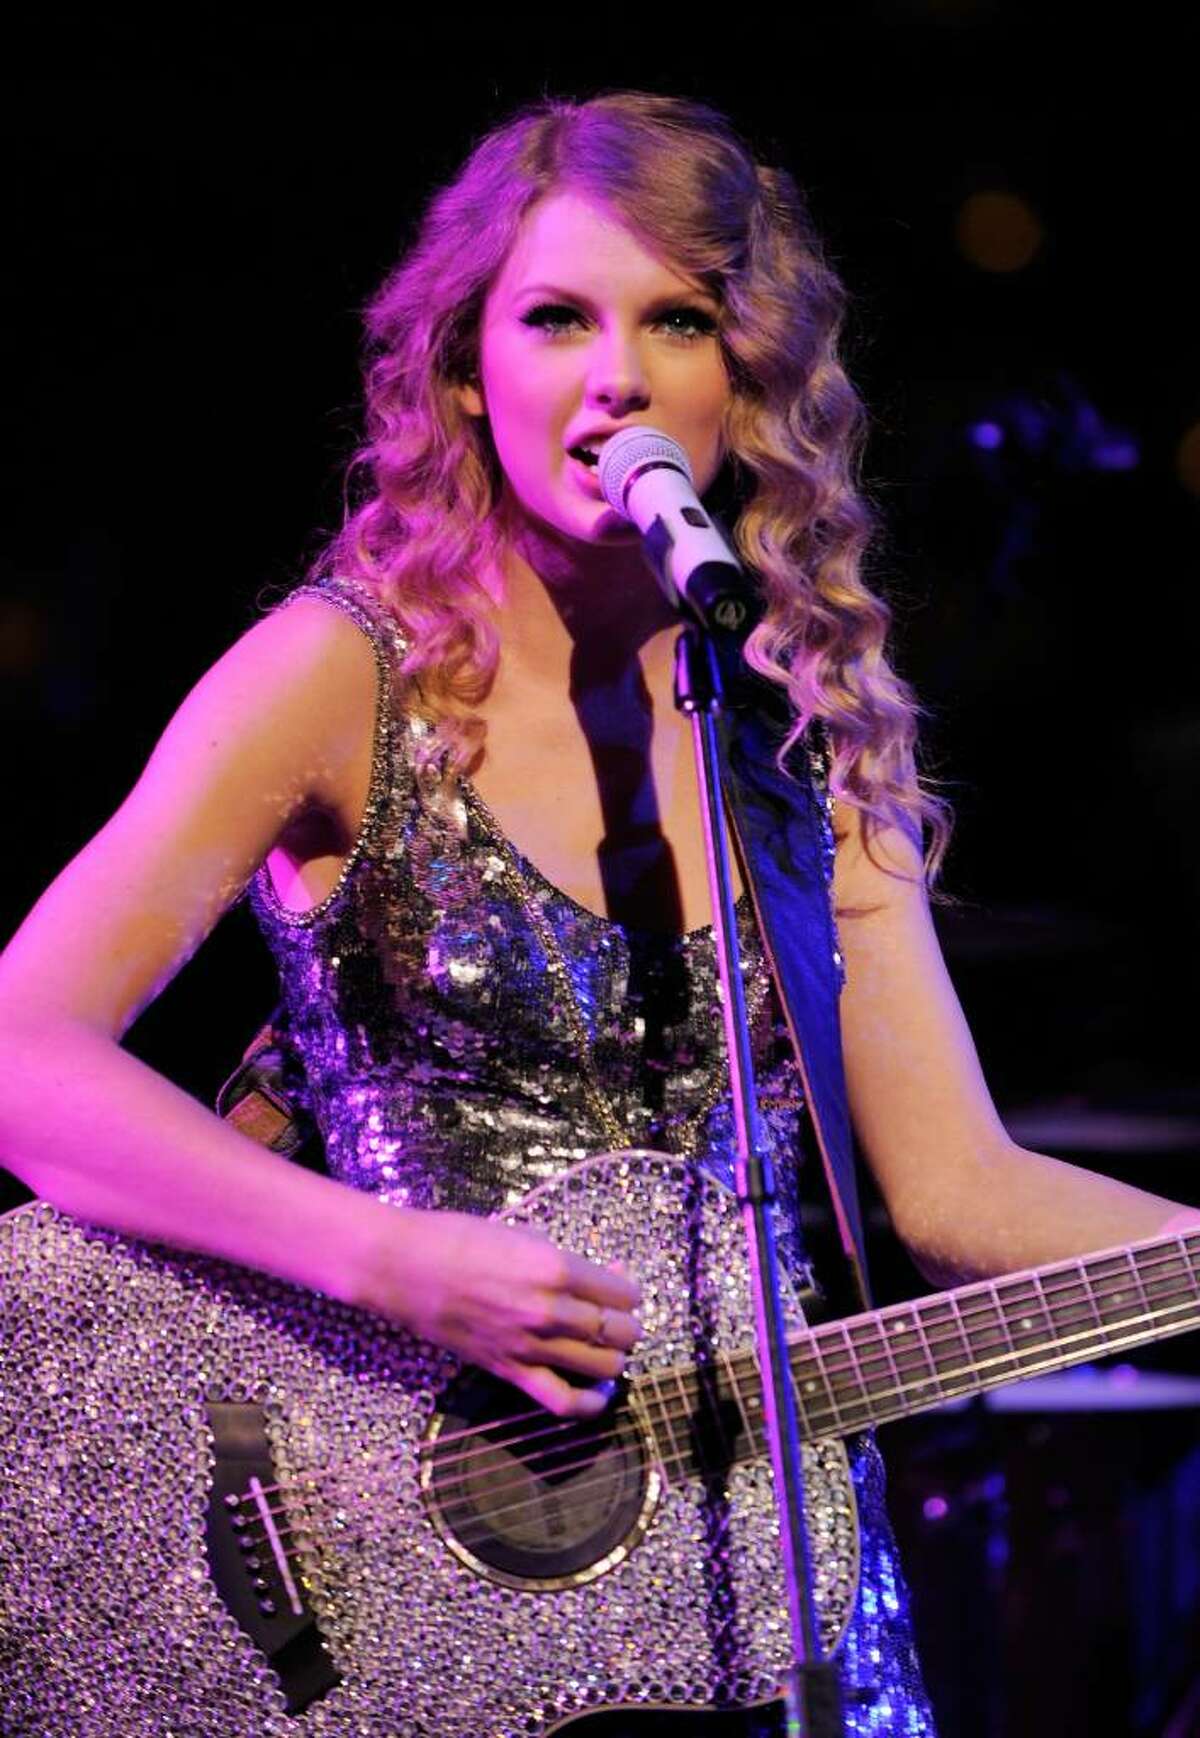 NEW YORK - MAY 04: Singer Taylor Swift performs onstage at Time's 100 most influential people in the world gala at Frederick P. Rose Hall, Jazz at Lincoln Center on May 4, 2010 in New York City. (Photo by Jemal Countess/Getty Images for Time Inc) *** Local Caption *** Taylor Swift